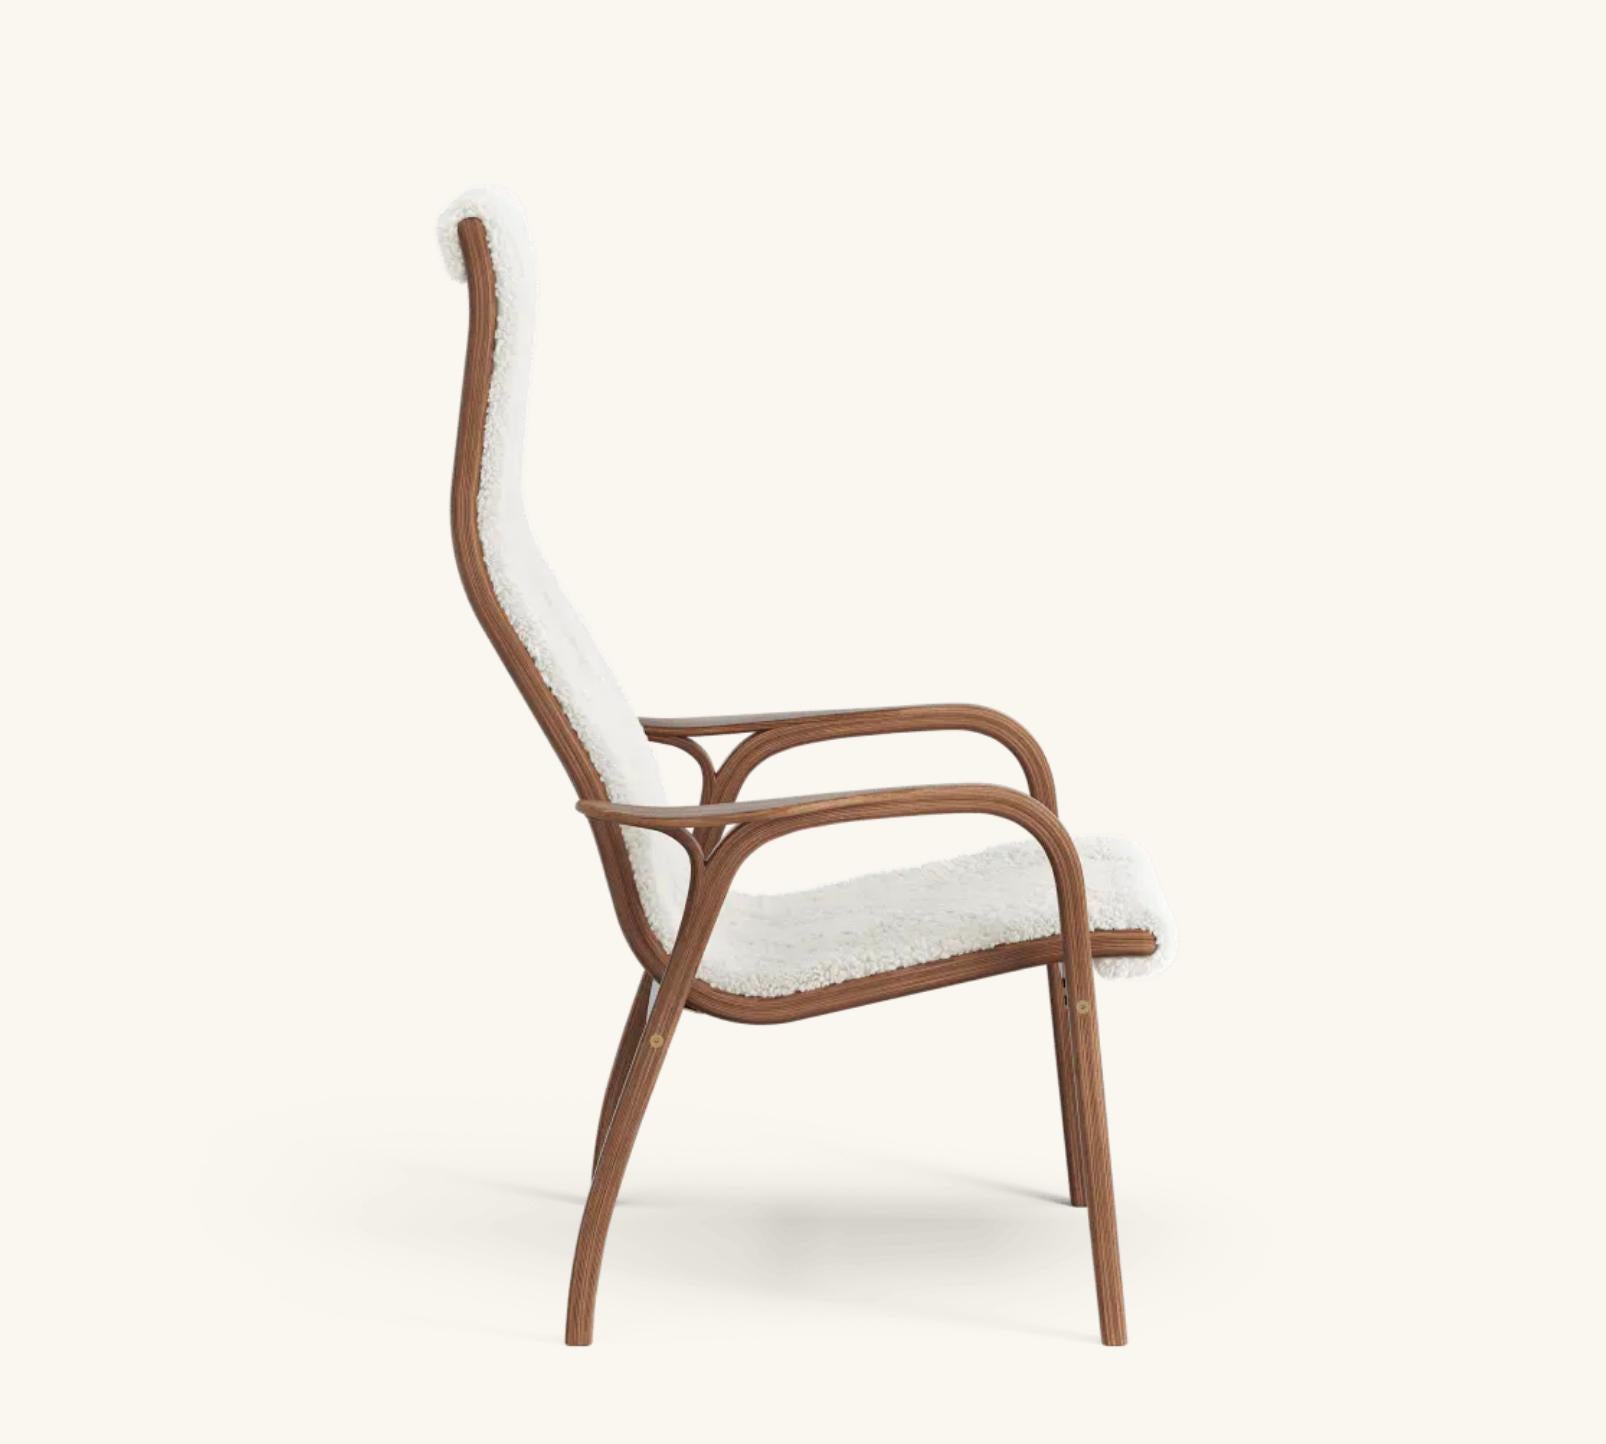 Yngve Ekström Lamino Easy Chair by Swedese in Walnut and Sheepskin 'Off White'. New, design from 1956.

The Lamino by Yngve Ekström is one of the most iconic Scandinavian easy chairs. Designed in 1956, this chair has never gotten out of style. Due